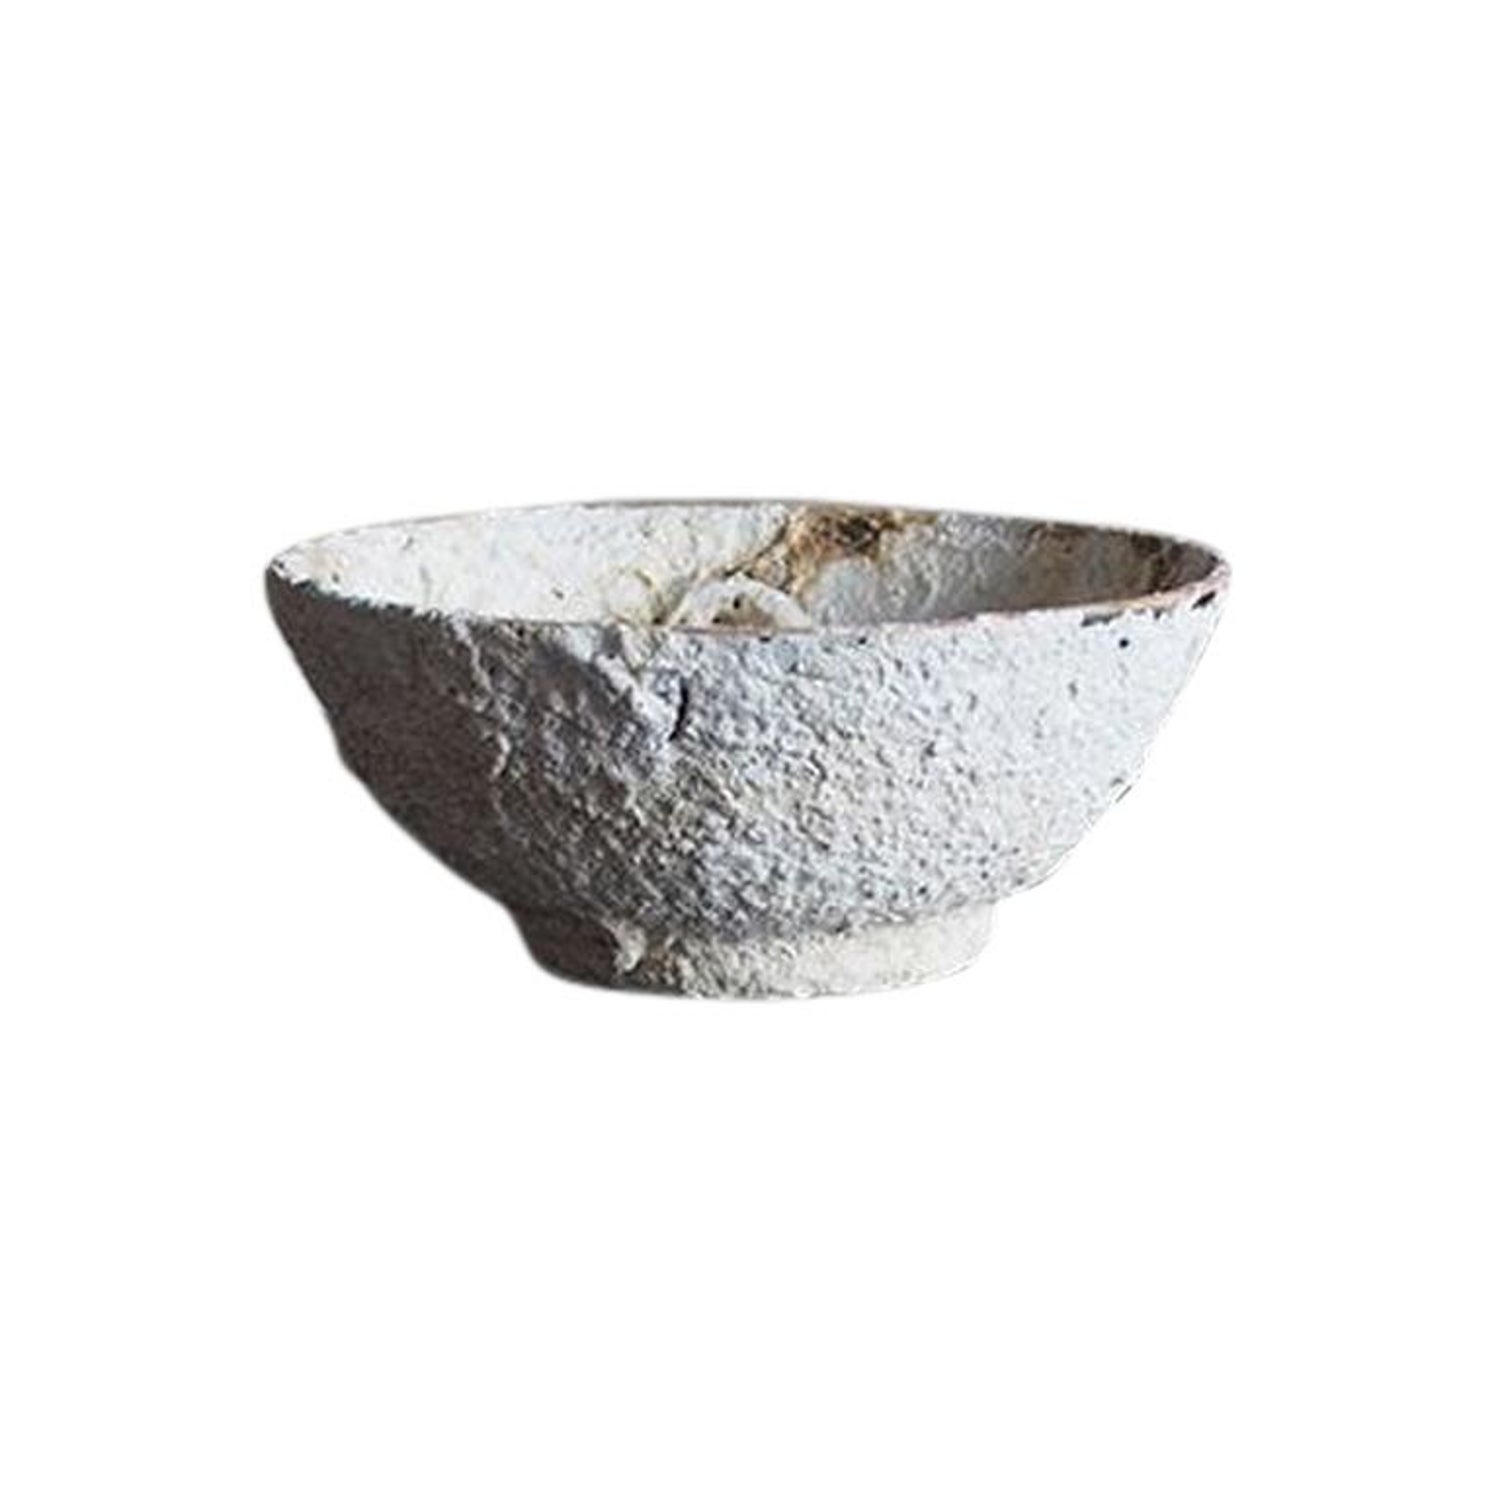 19th Century Shipwreck Bowl For Sale at 1stDibs